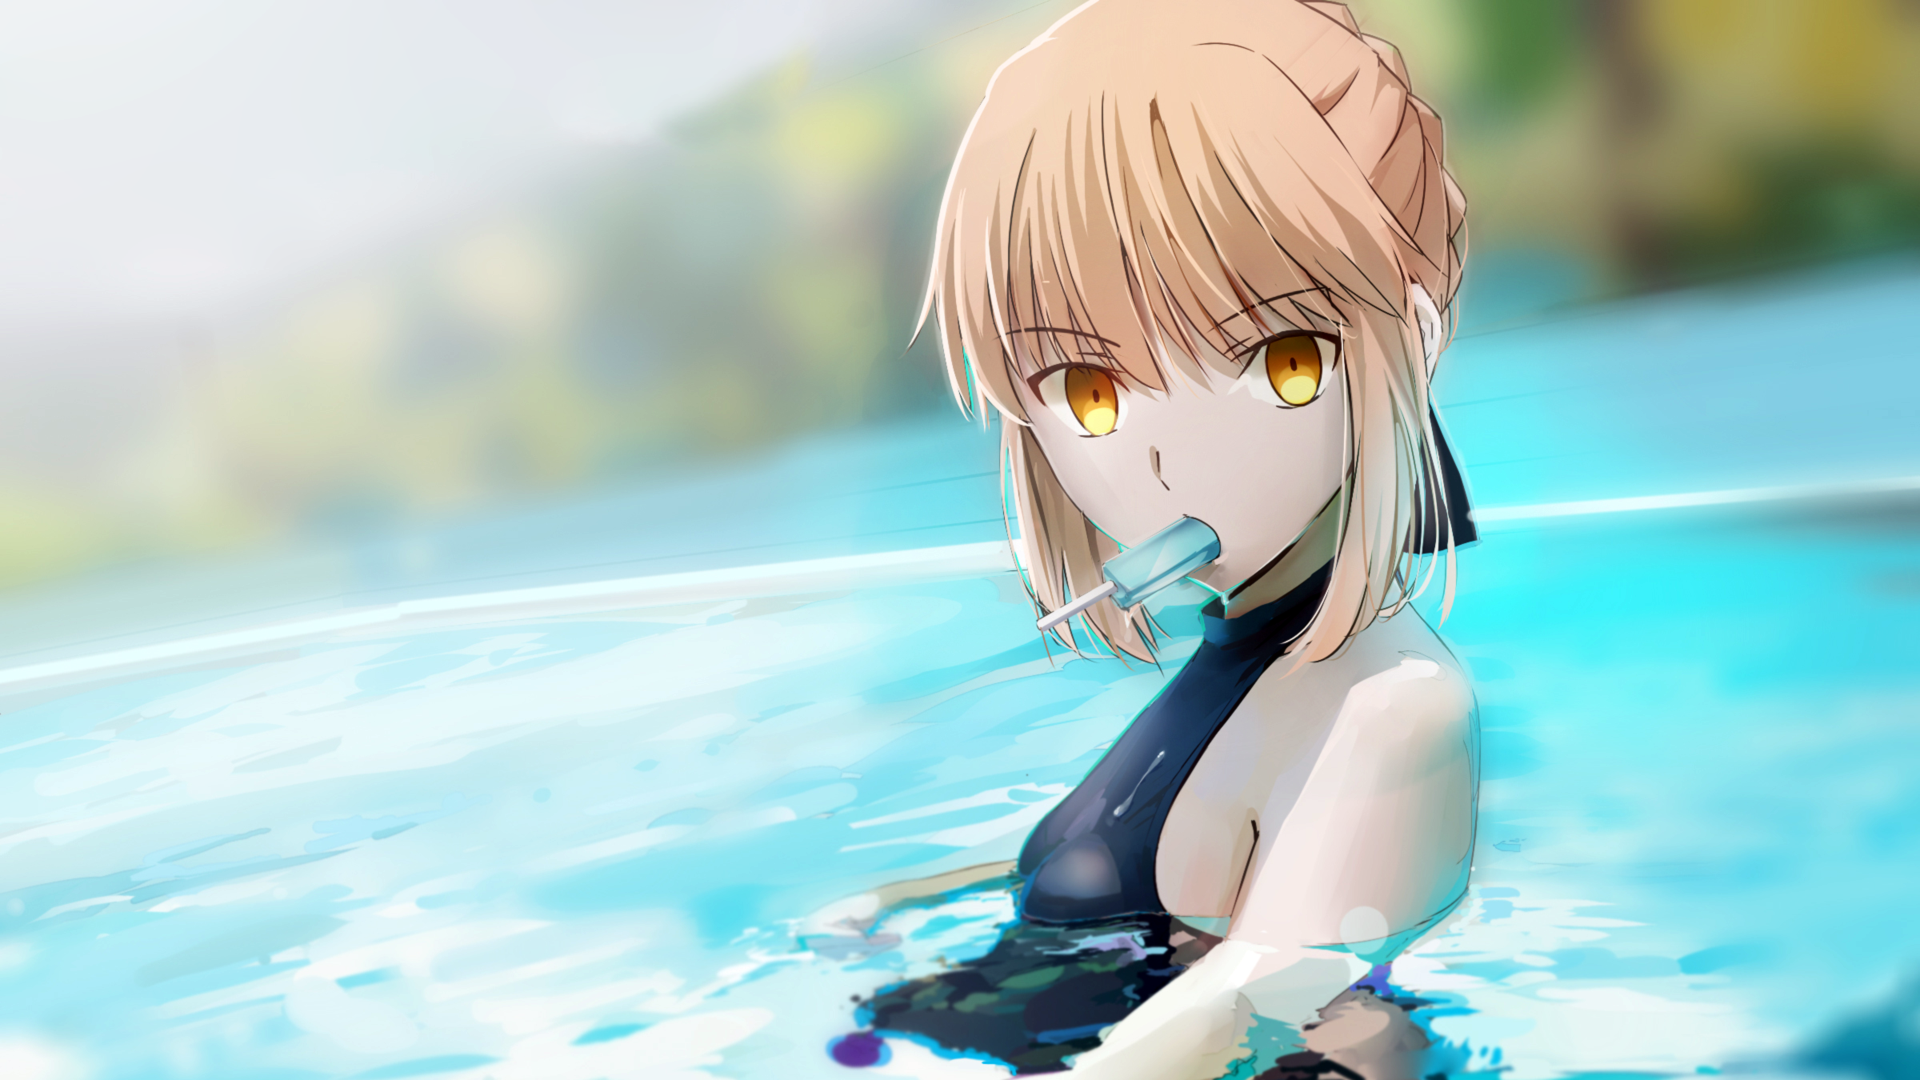 Anime 1920x1080 anime girls ice cream anime Fate series Saber Alter Artoria Pendragon blonde yellow eyes suggestive popsicle food sweets in water water women outdoors swimwear looking at viewer